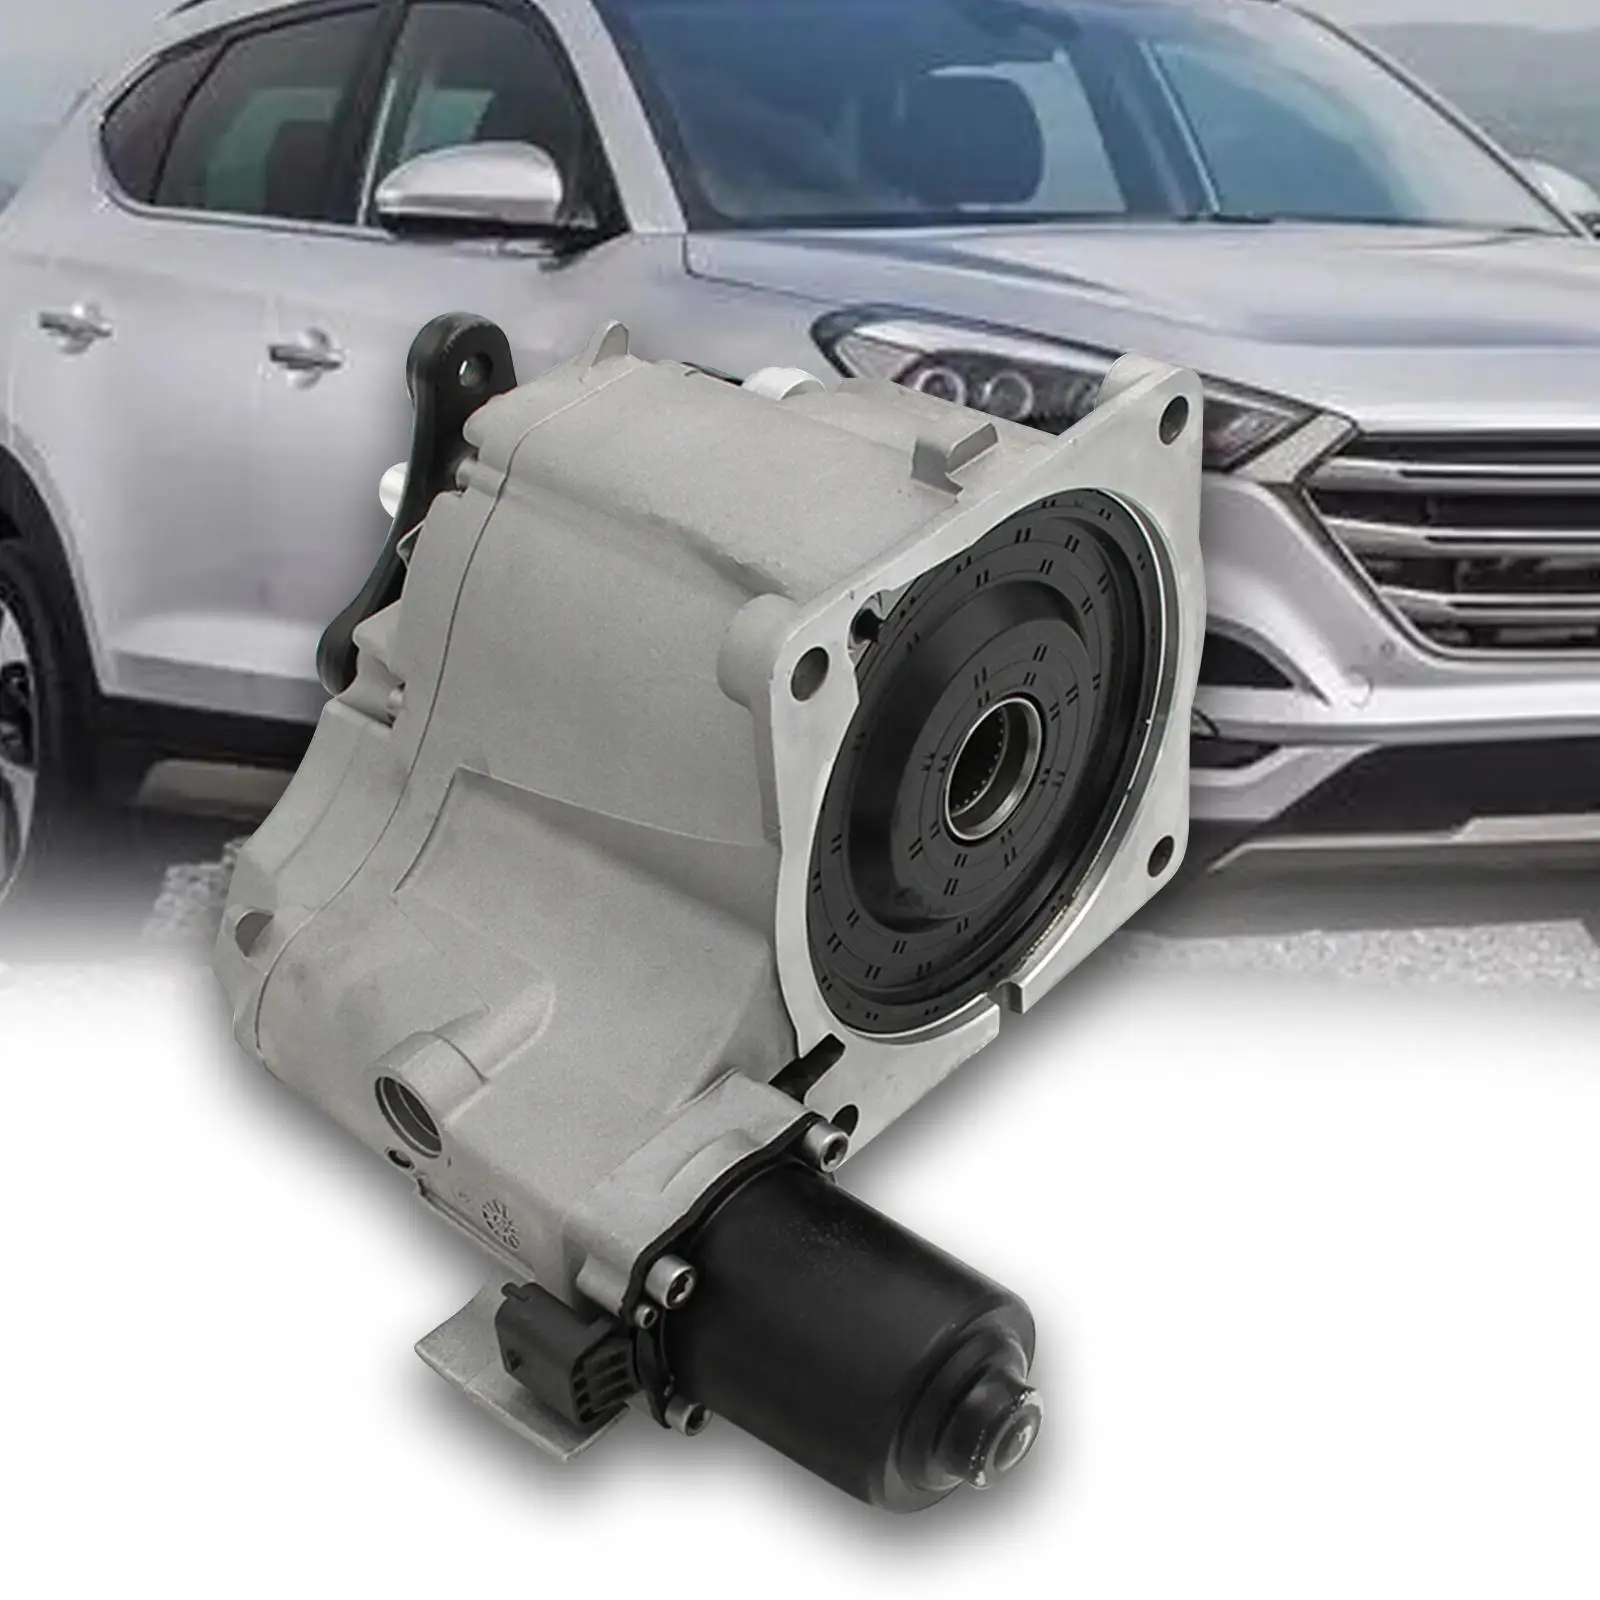 Professional Coupling Assembly 47800-3B520 Assembly Replaces Metal Sturdy Vehicle 53000 3B510 for Hyundai Santa FE Tucson